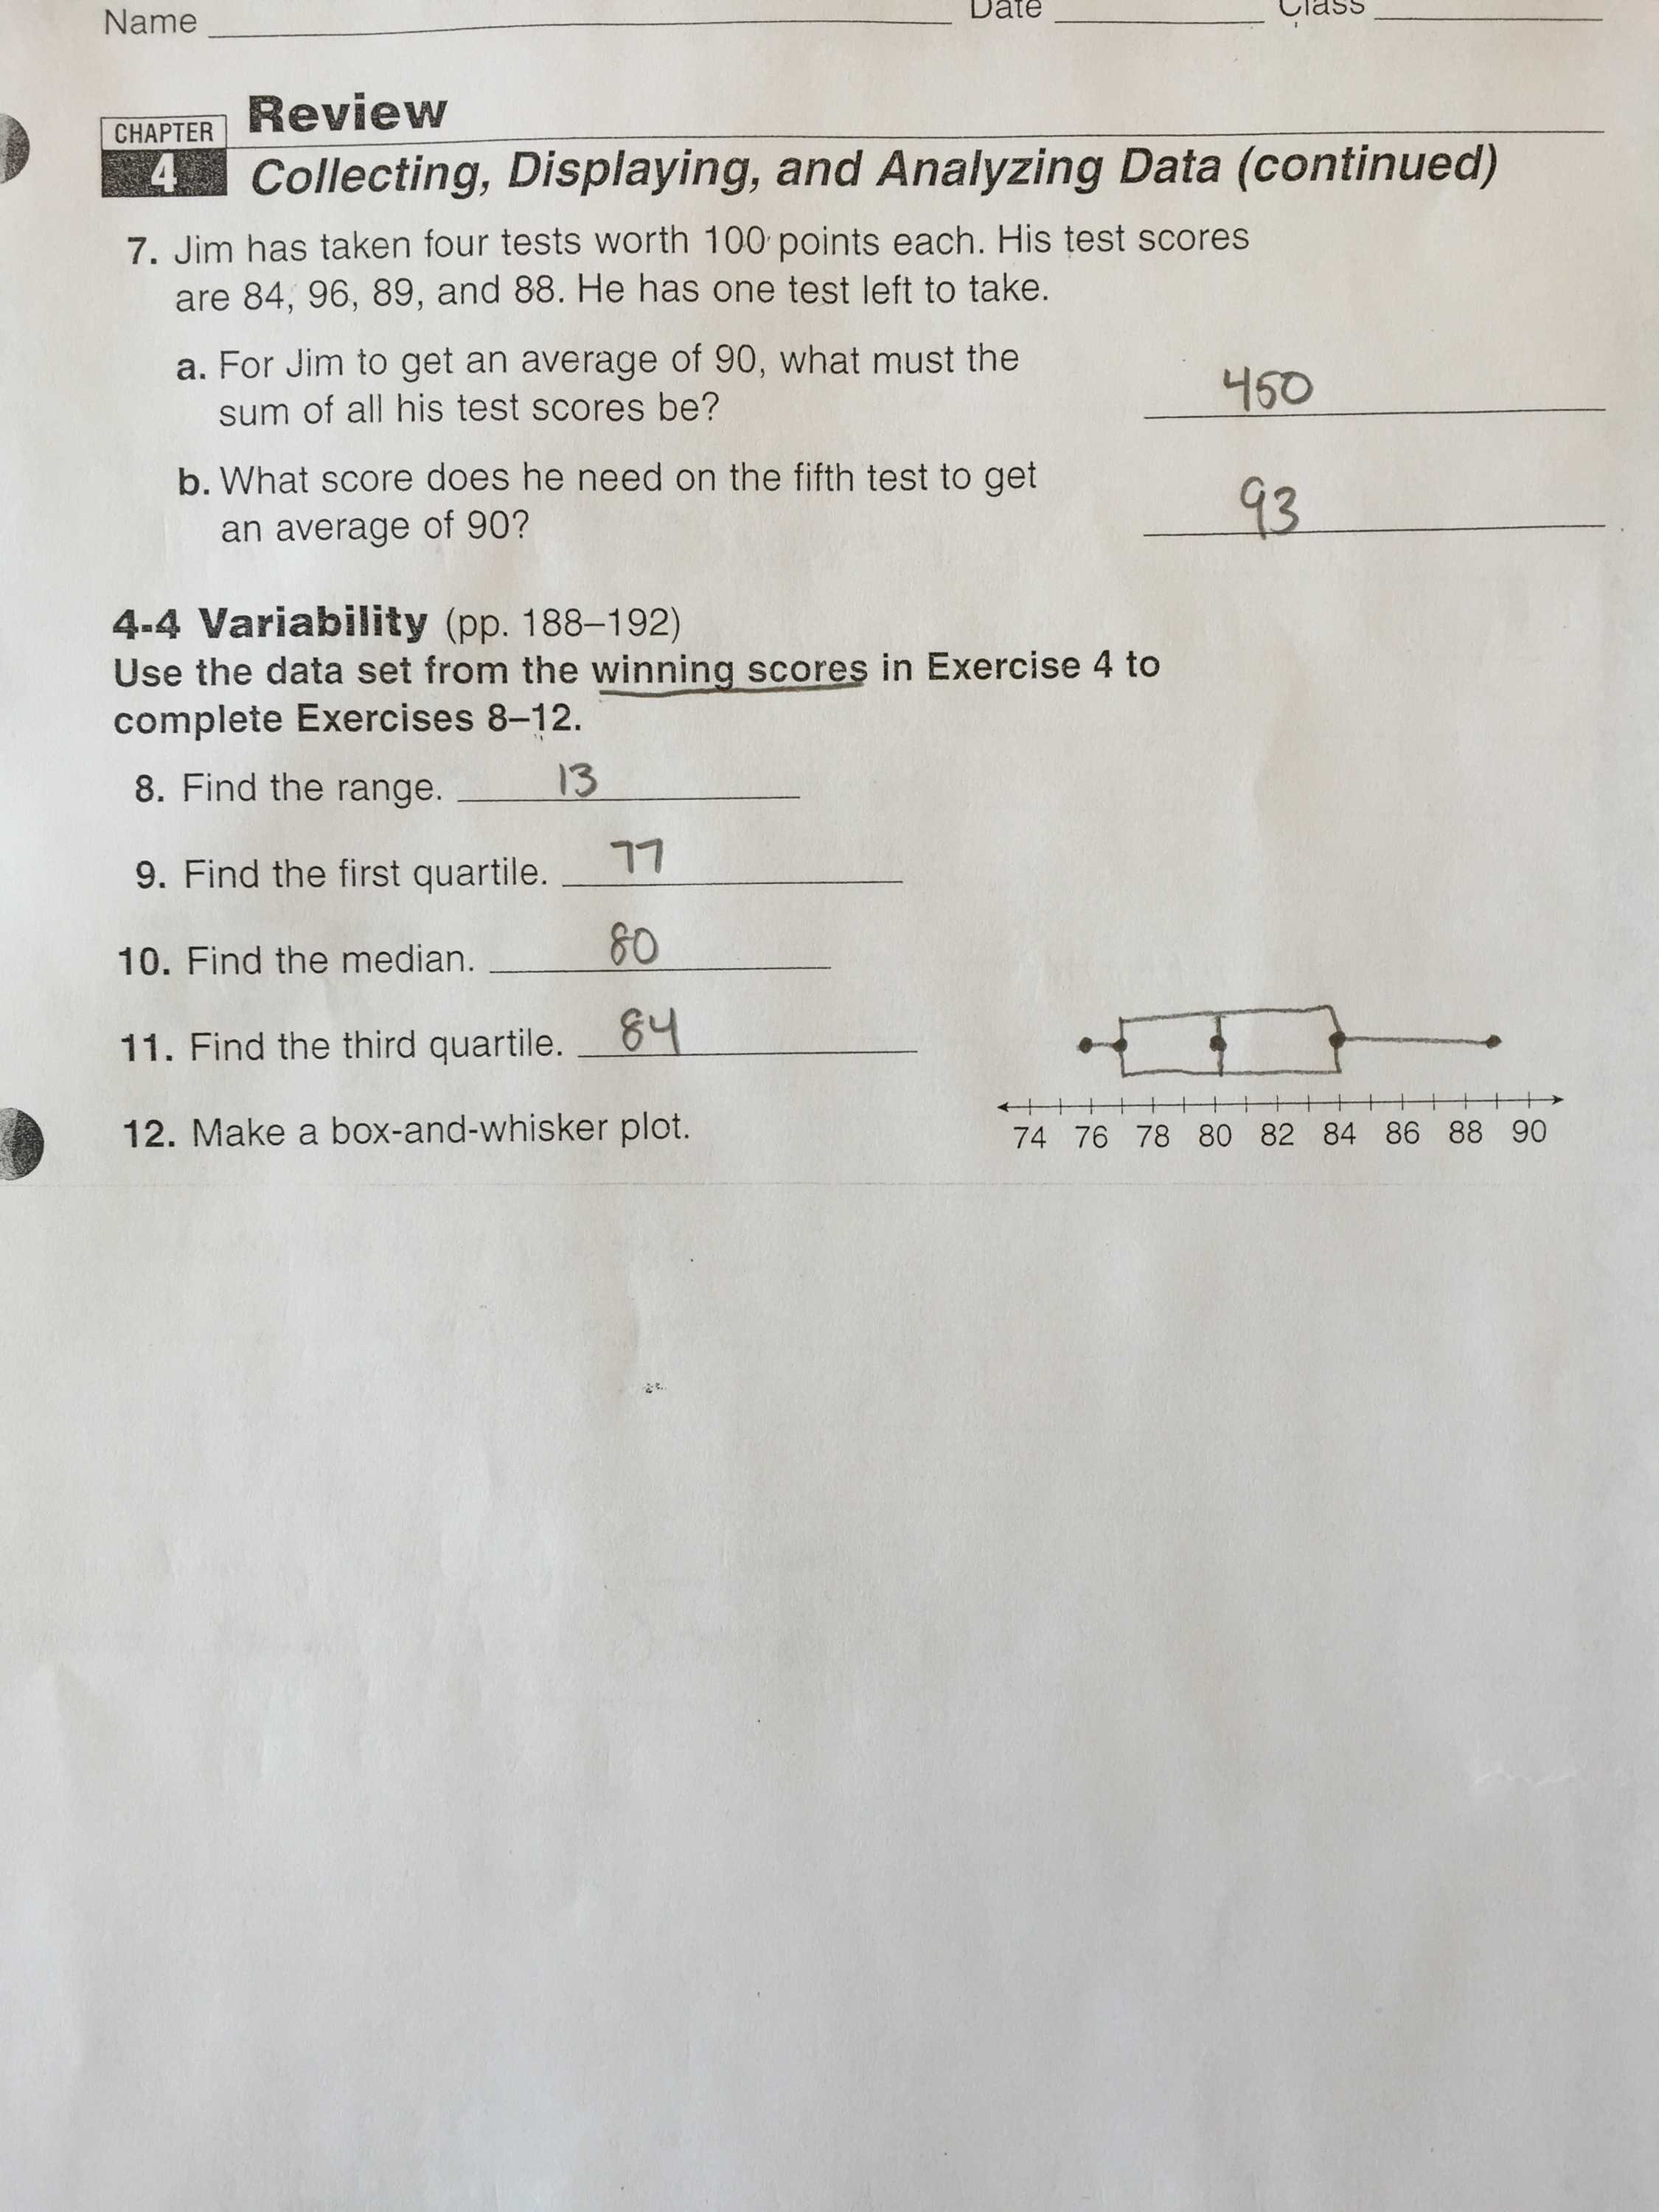 Box and Whisker Plot Worksheet 1 Also 7th Grade Mid Chapter 4 Review Sheet Answers